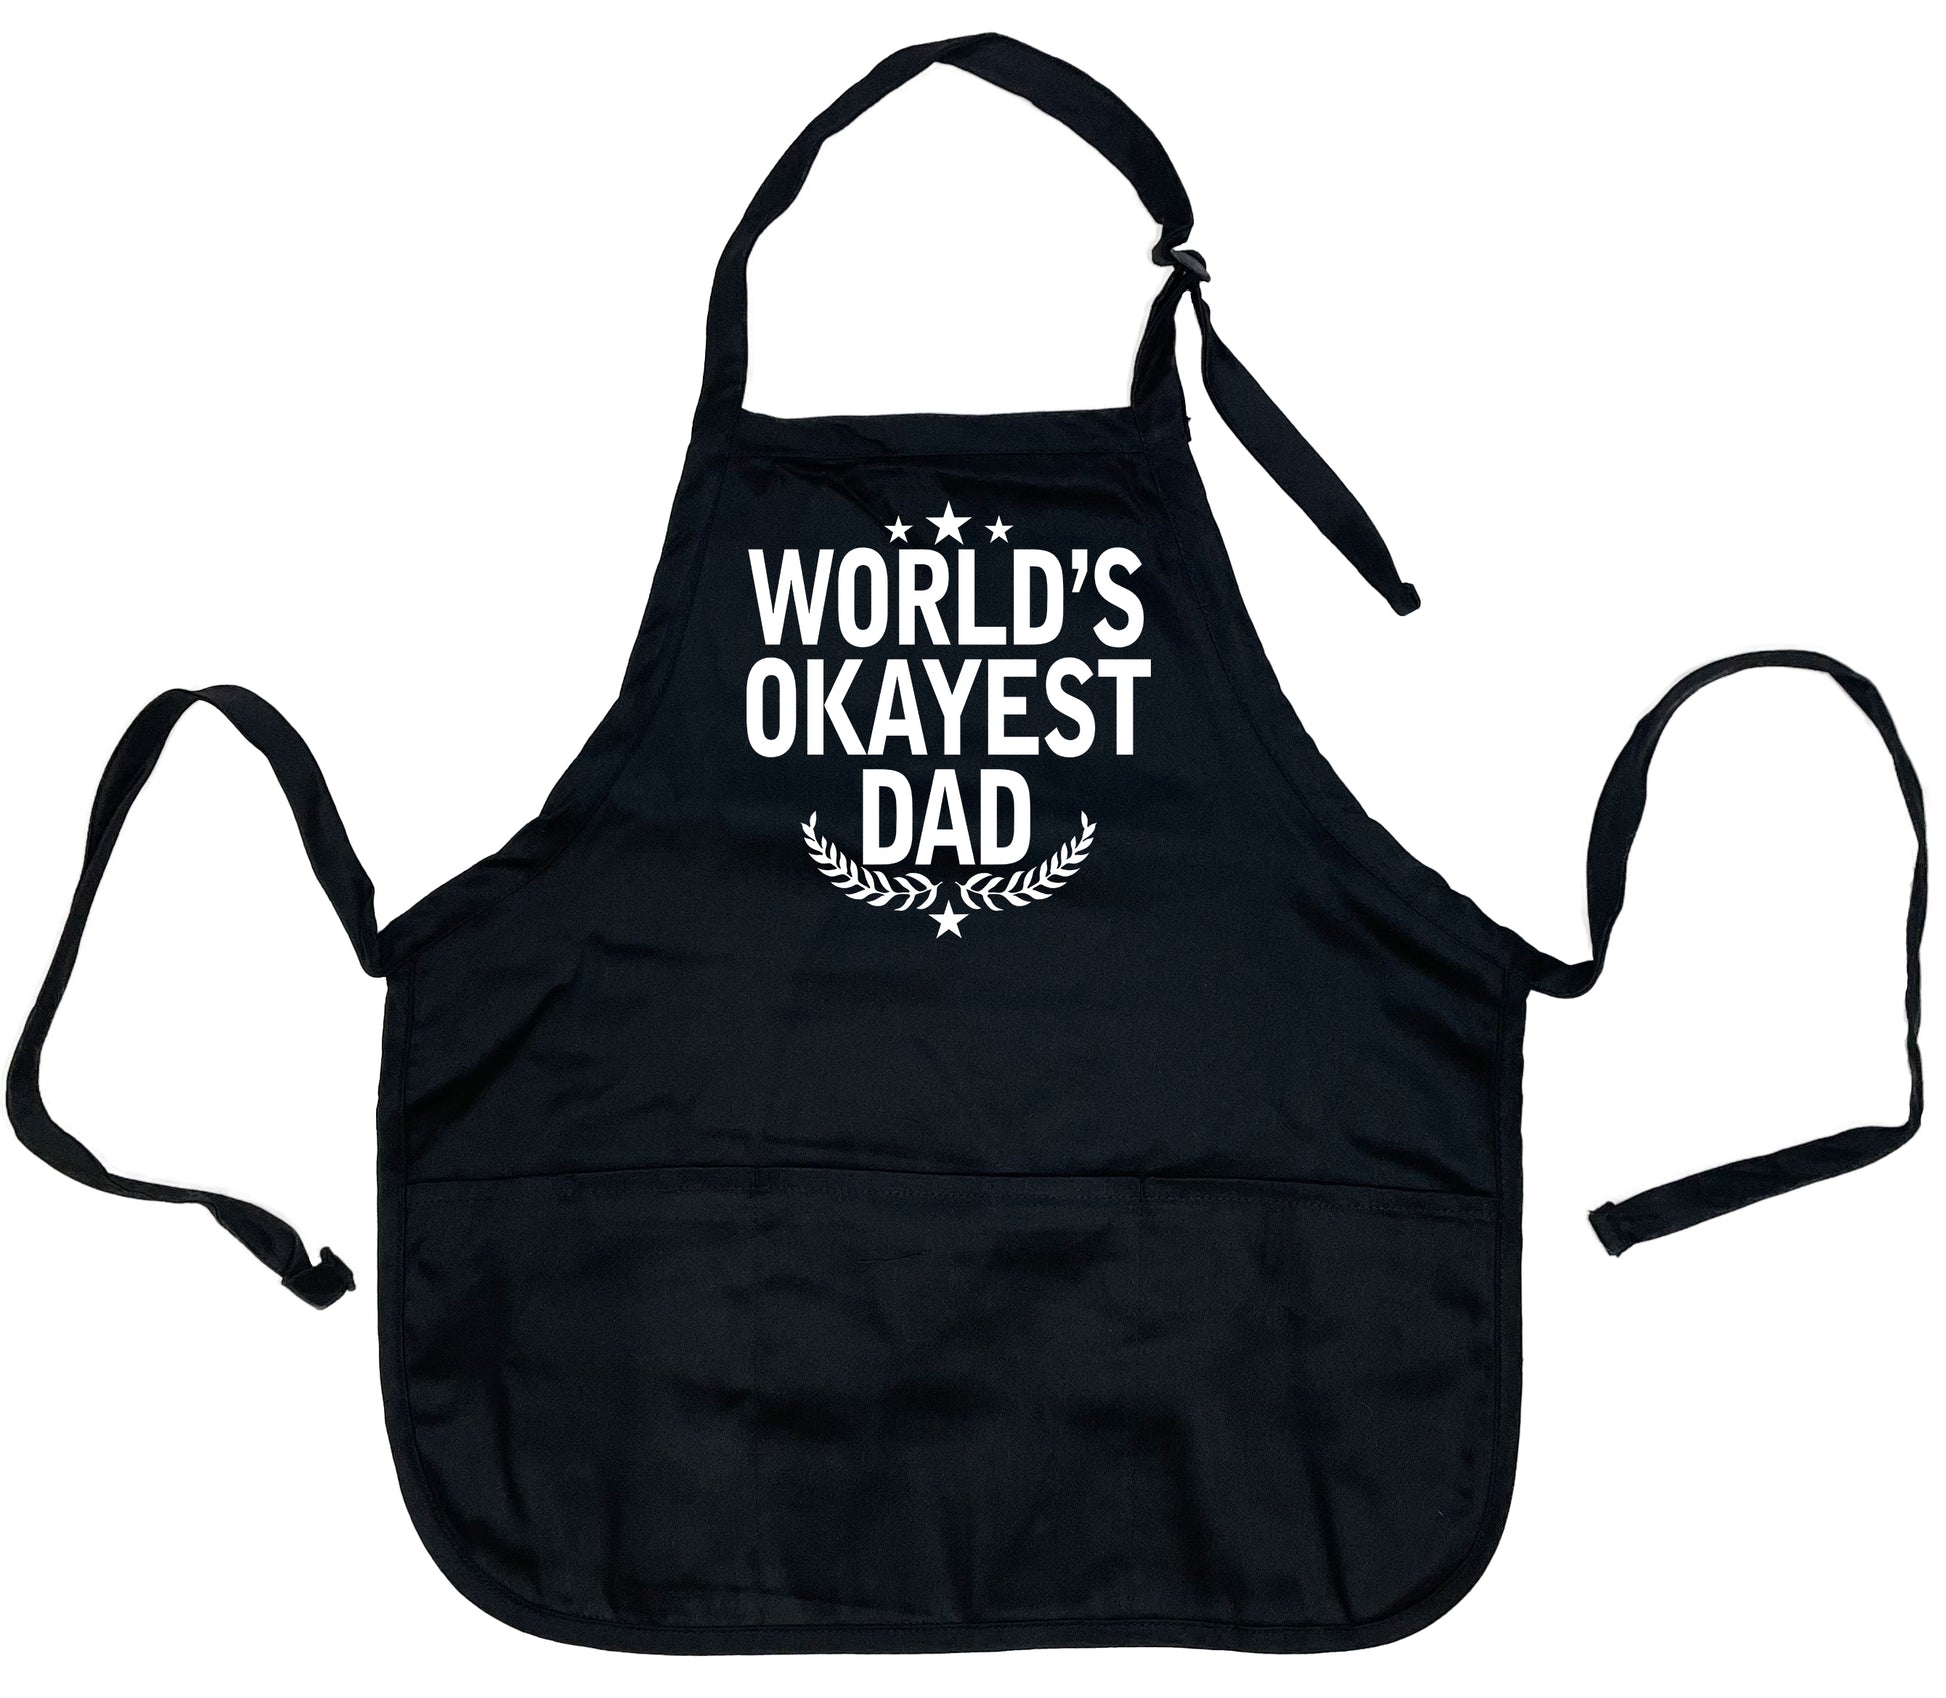 World's Okayest Dad Apron - Funny T Shirts & Graphic Tees